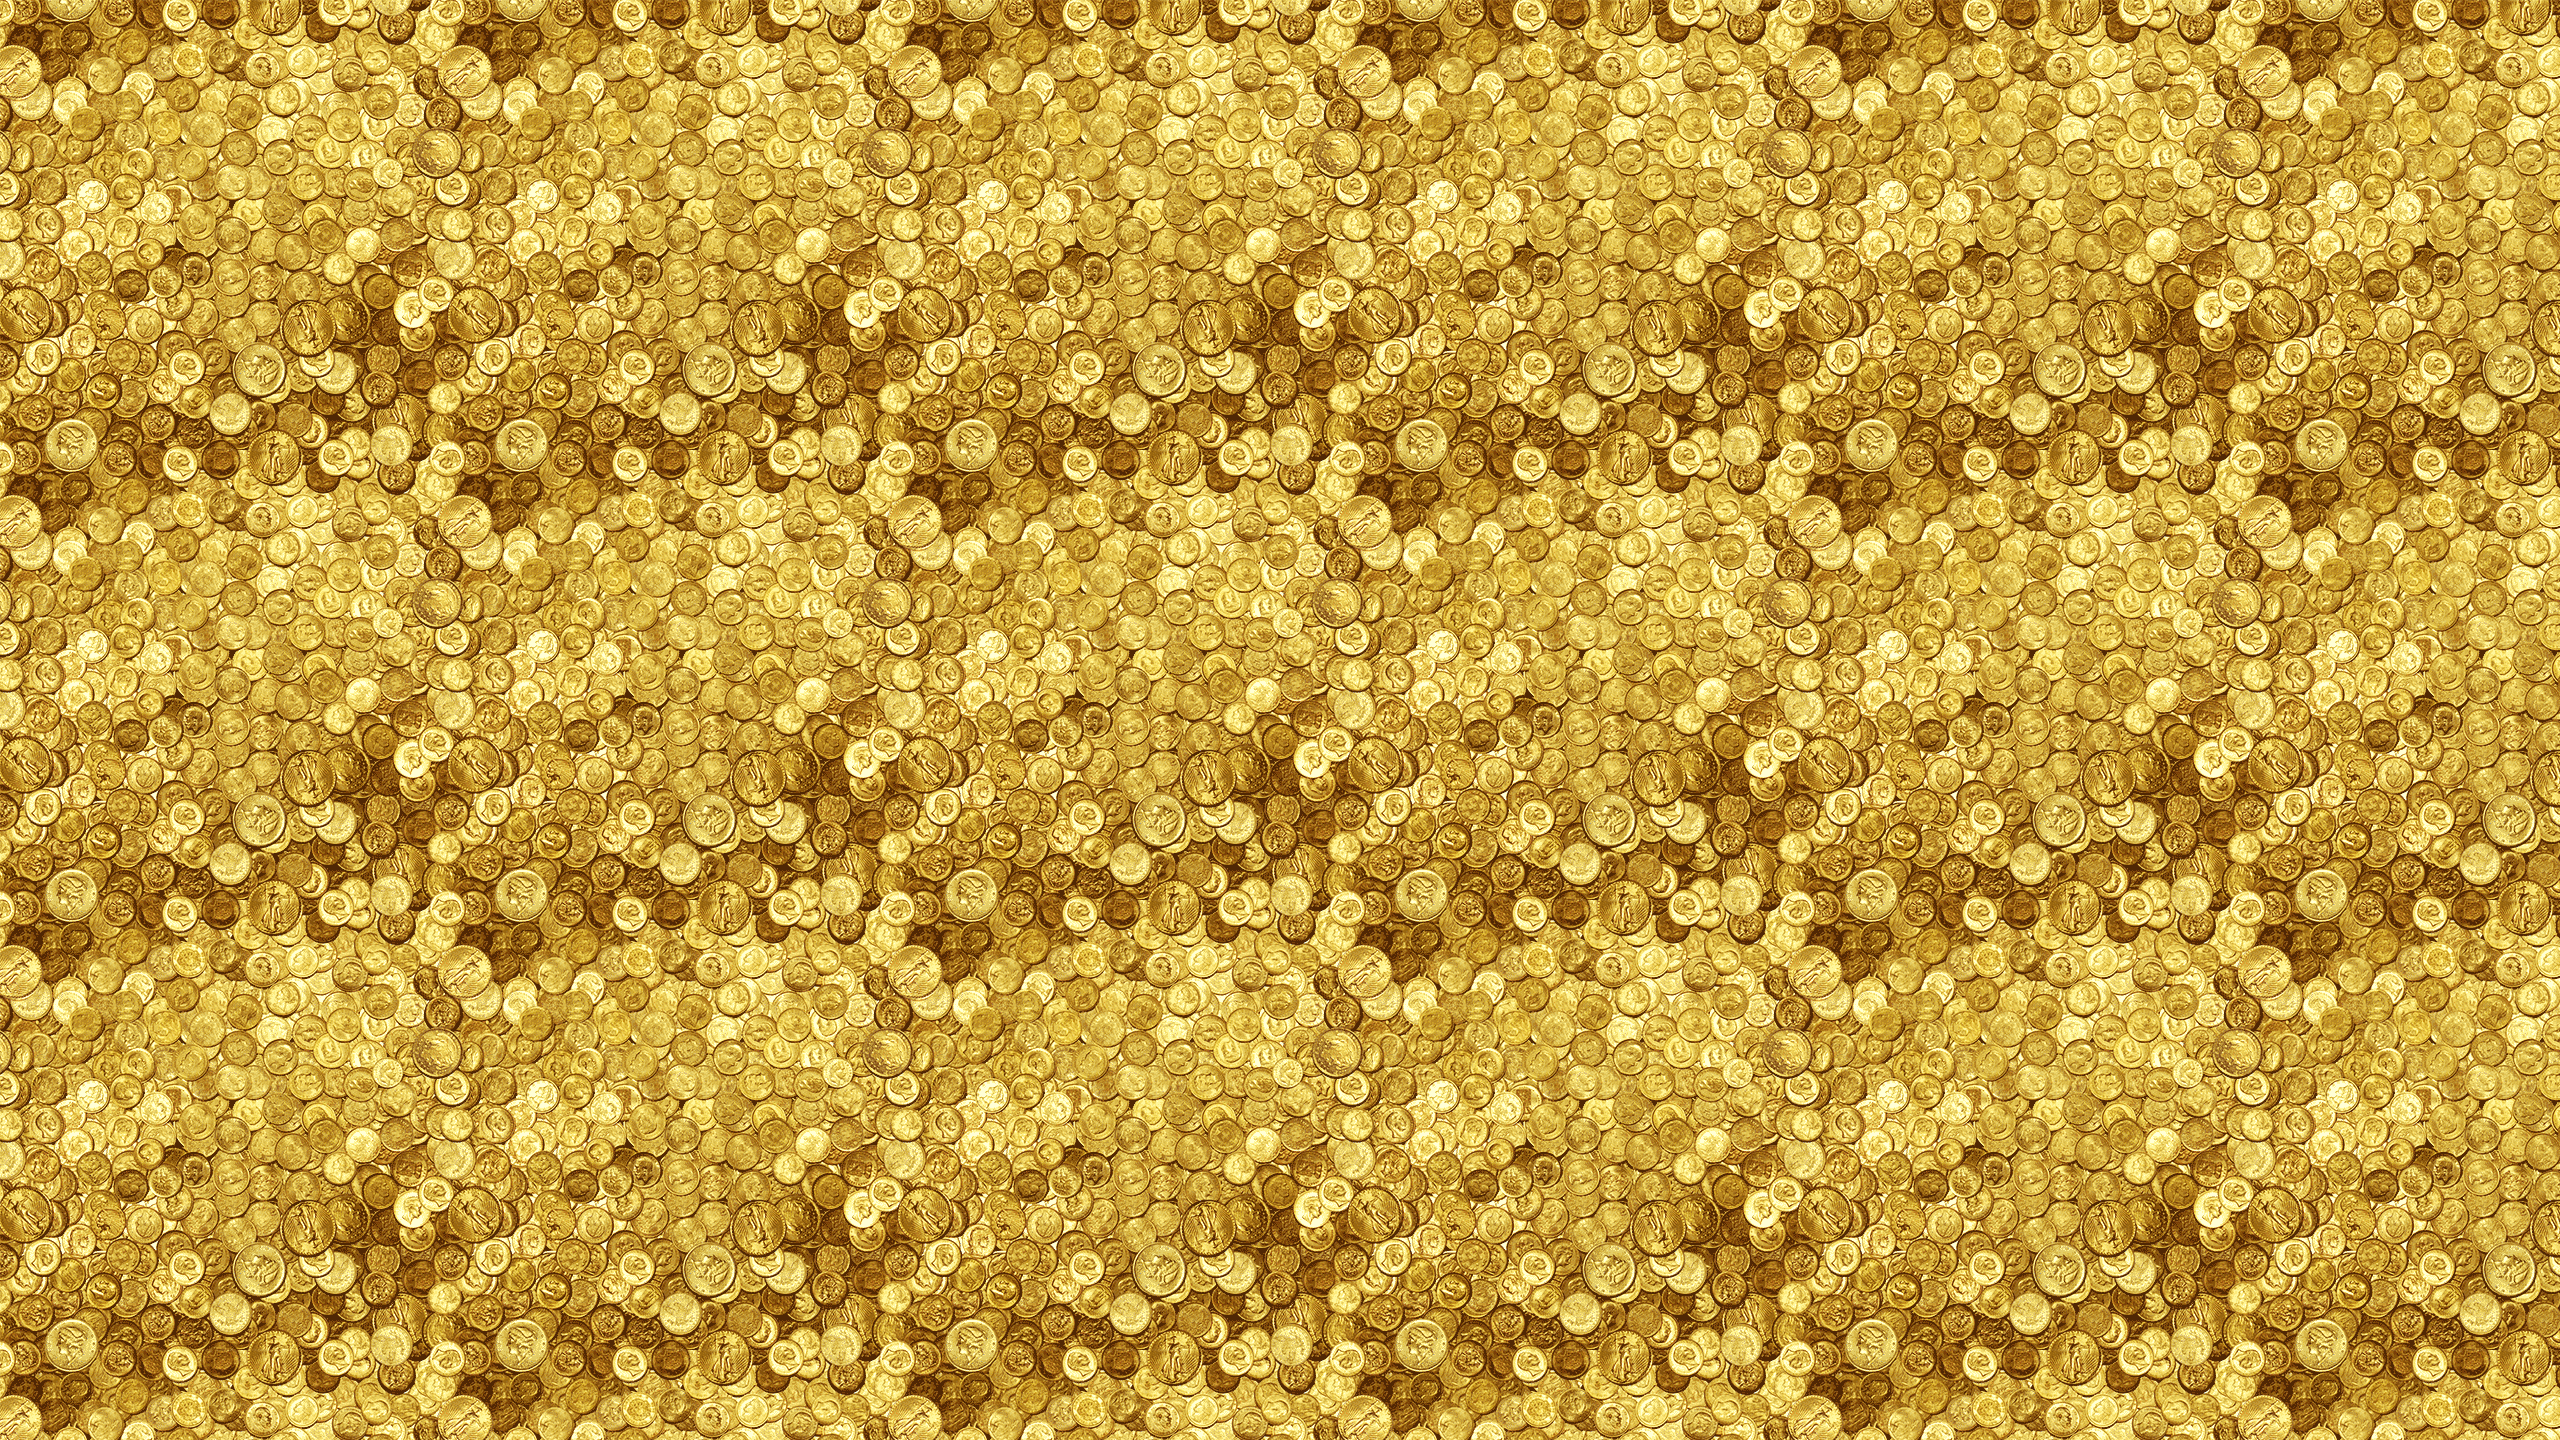 This Gold Coins Desktop Wallpaper Is Easy Just Save The